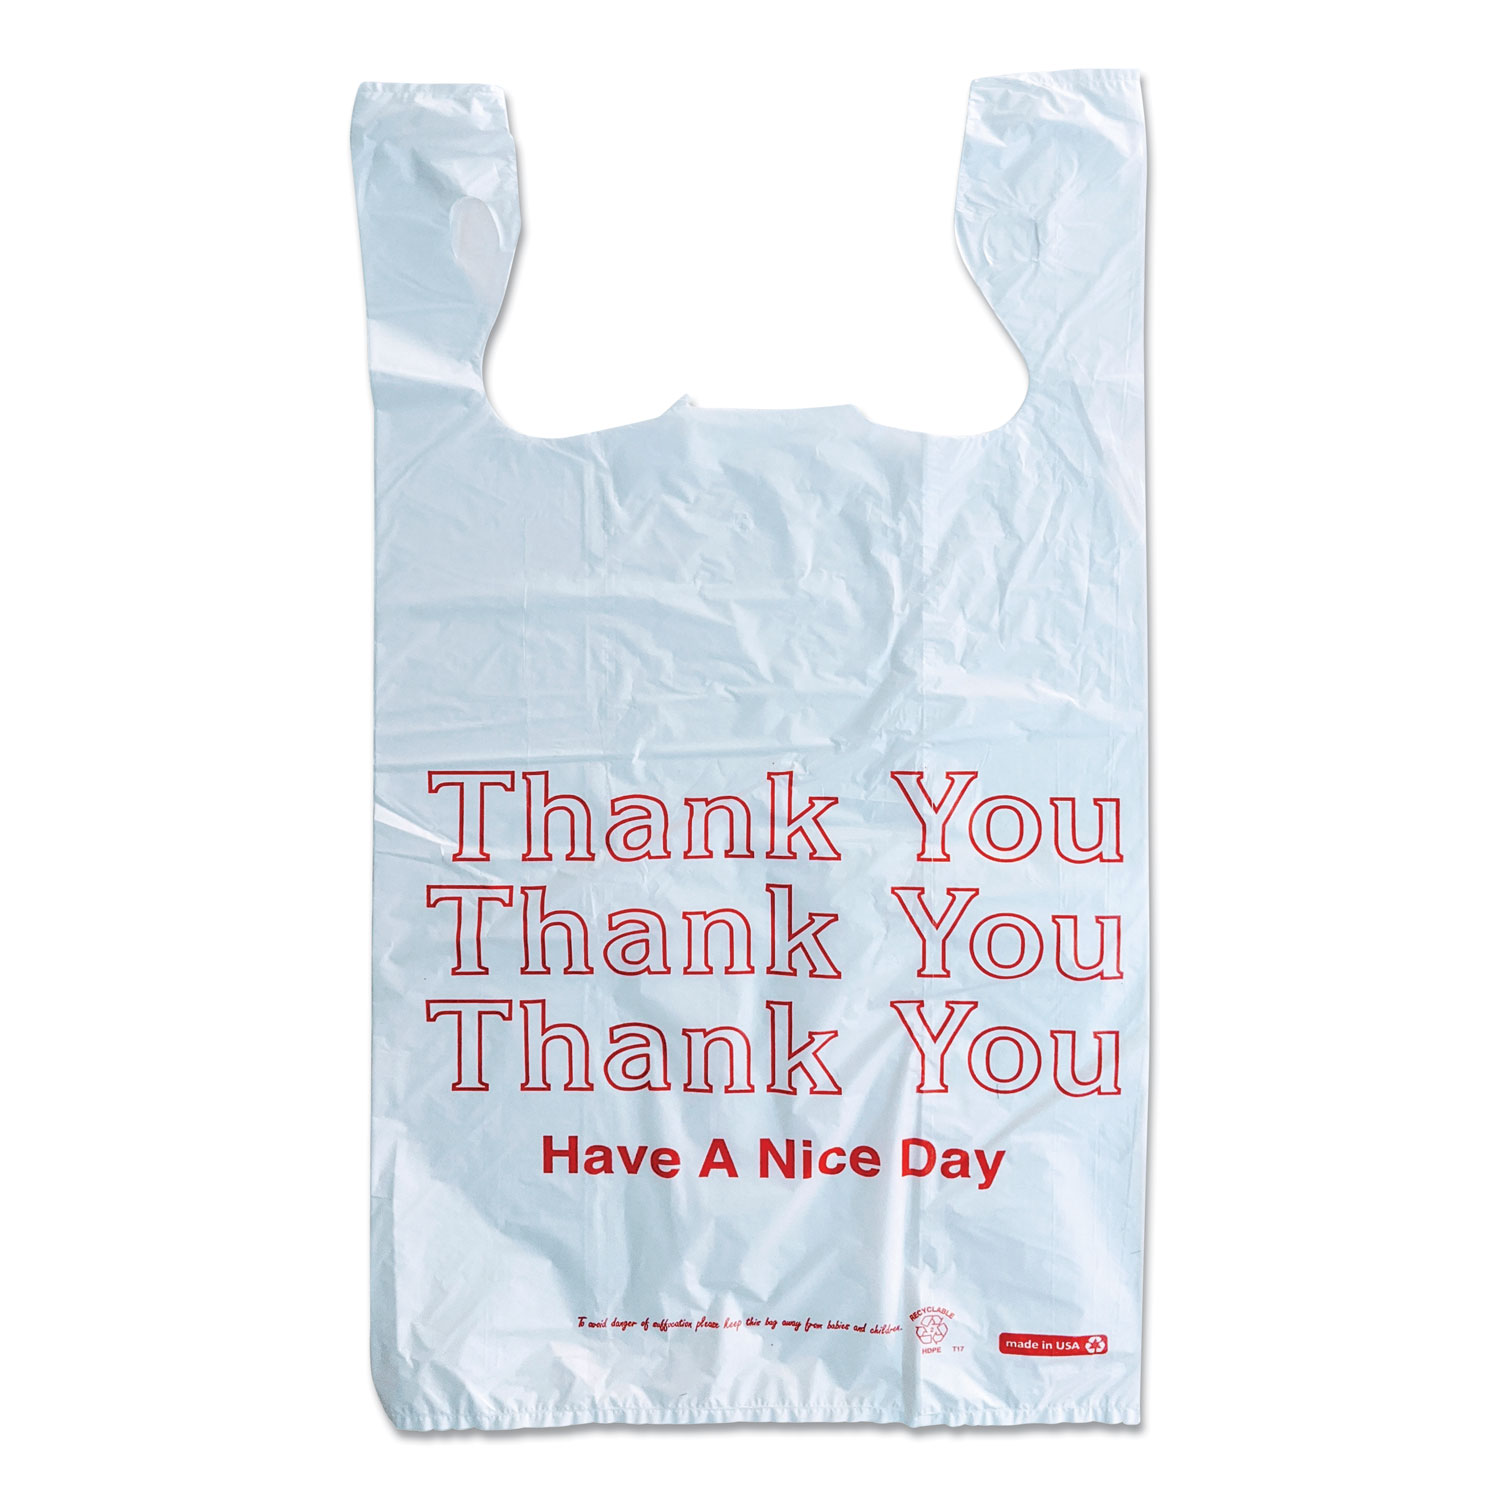  Monarch 925128 Plastic Thank You - Have a Nice Day Shopping Bags, 11.5 x 6.5 x 22, White, 250/Box (AVE823528) 